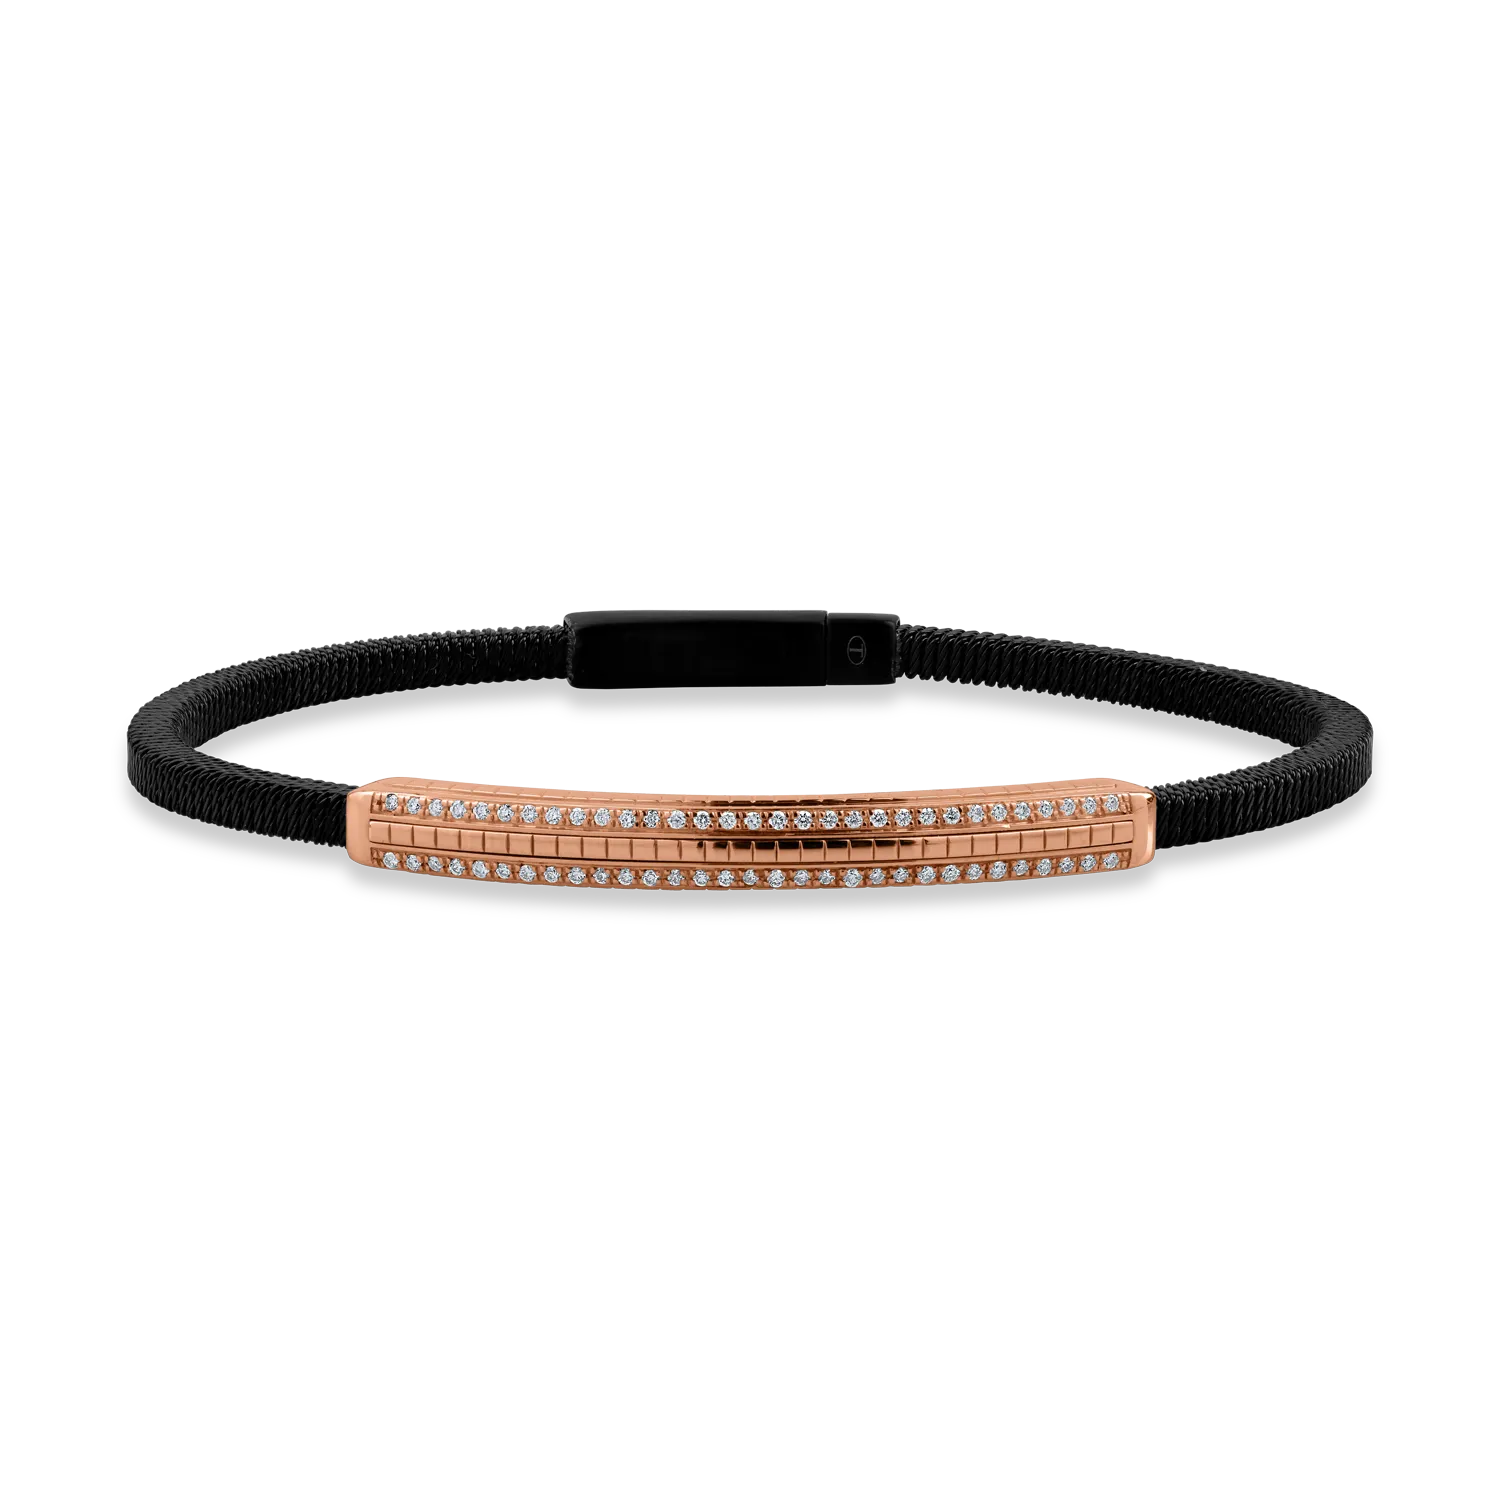 Rose gold and steel bracelet with 0.22ct diamonds